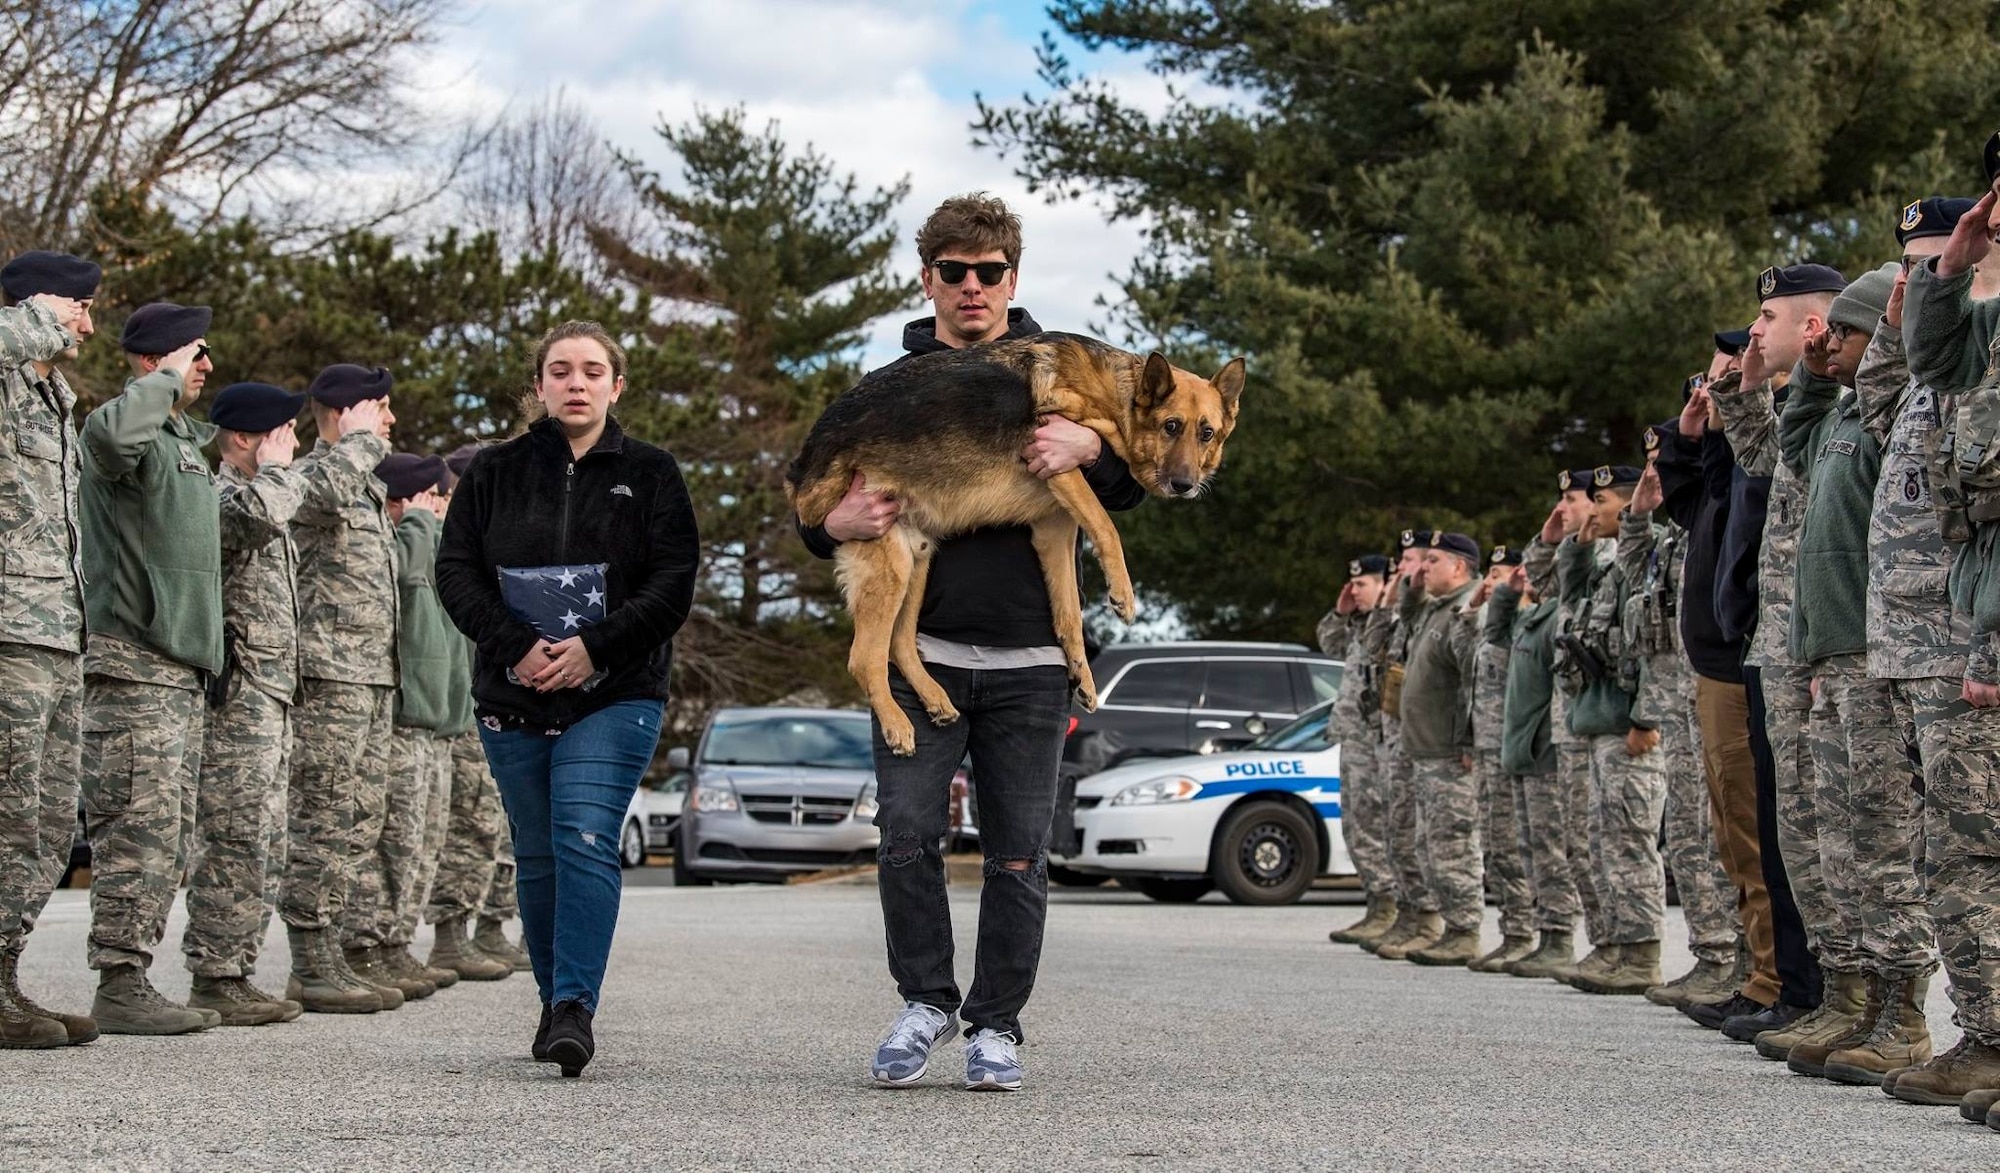 Members of the 436th Security Forces Squadron render a final salute to Rico, a retired military working dog. His former handler and current owner, retired Tech. Sgt. Jason Spangenberg, carried him to the Veterinary Treatment Facility at Dover Air Force Base, Del., Jan. 24, 2018. (U.S. Air Force photo by Roland Balik)